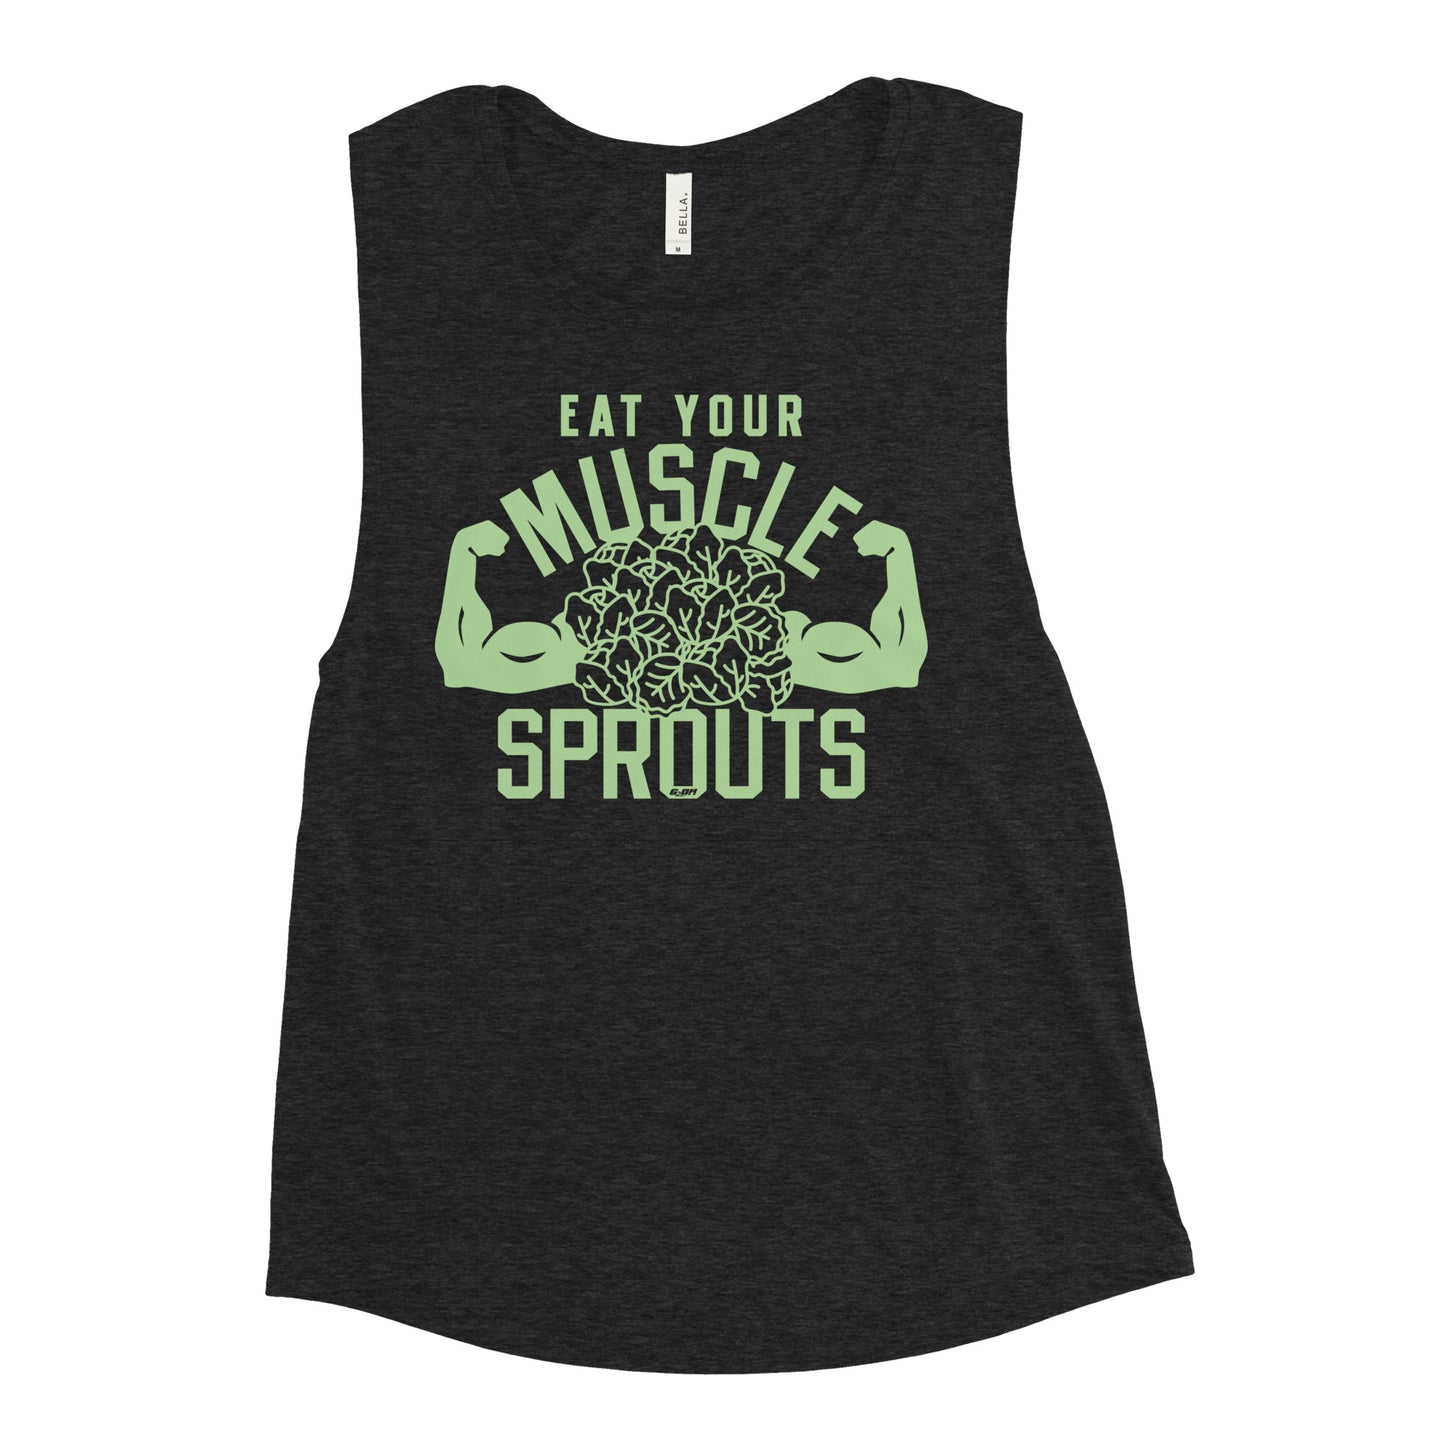 Eat Your Muscle Sprouts Women's Muscle Tank